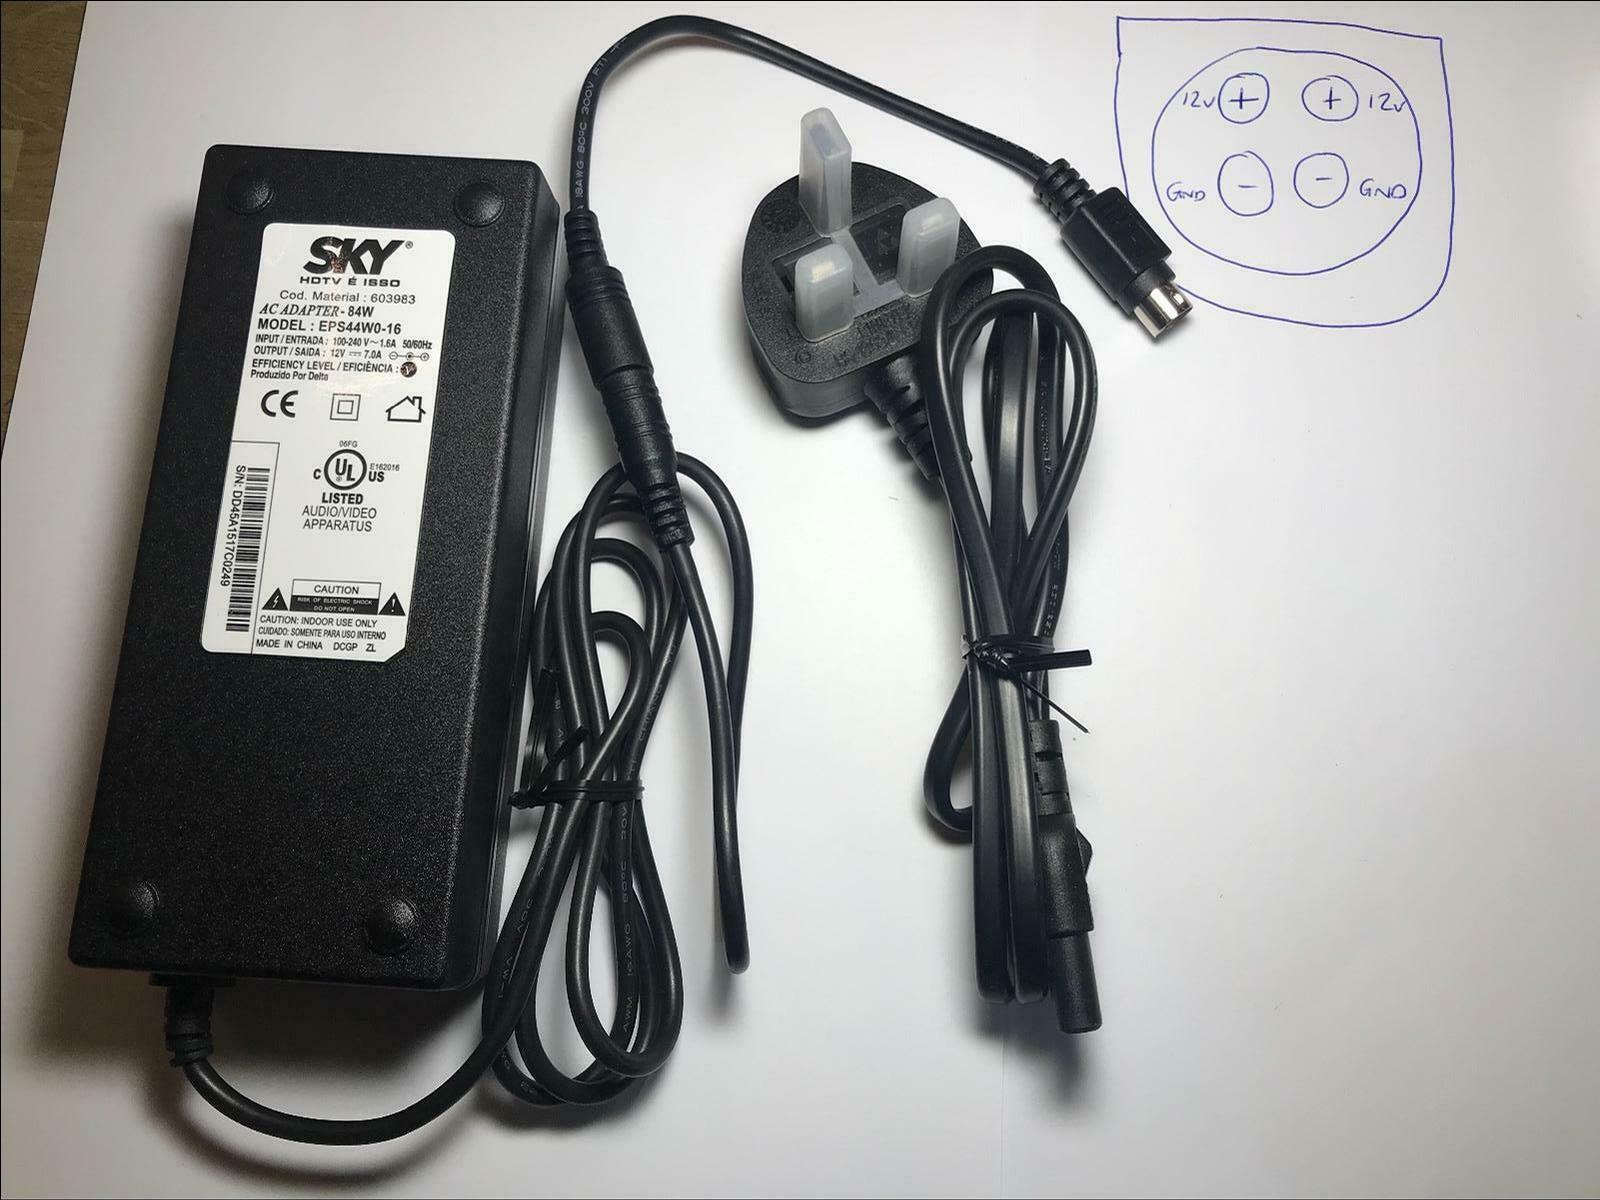 12V 5A 63W 4 Pin Din Plug AC Power Adaptor for POS PC RT-565-R4/RT-560-R4 Till Type: Power Adapter Max. Output Power: